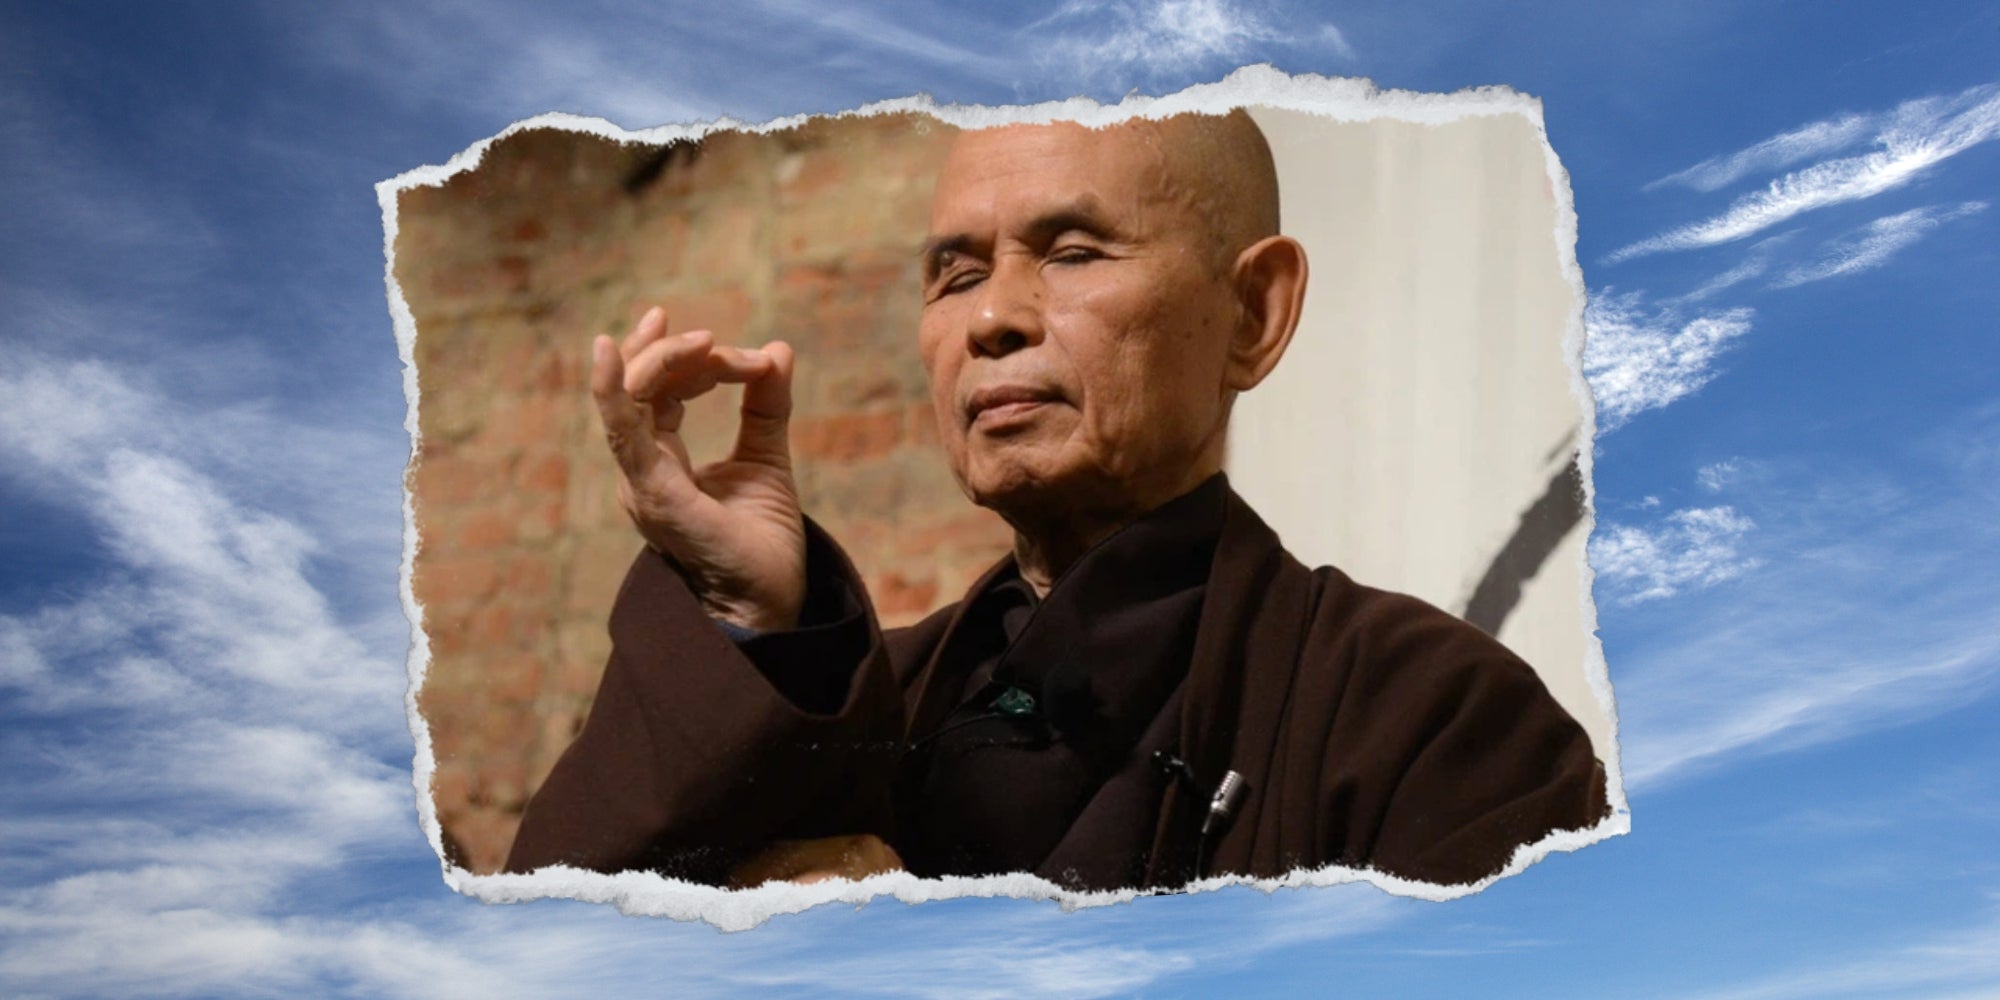 The Teachings of Buddhist Monk Thich Nhat Hanh